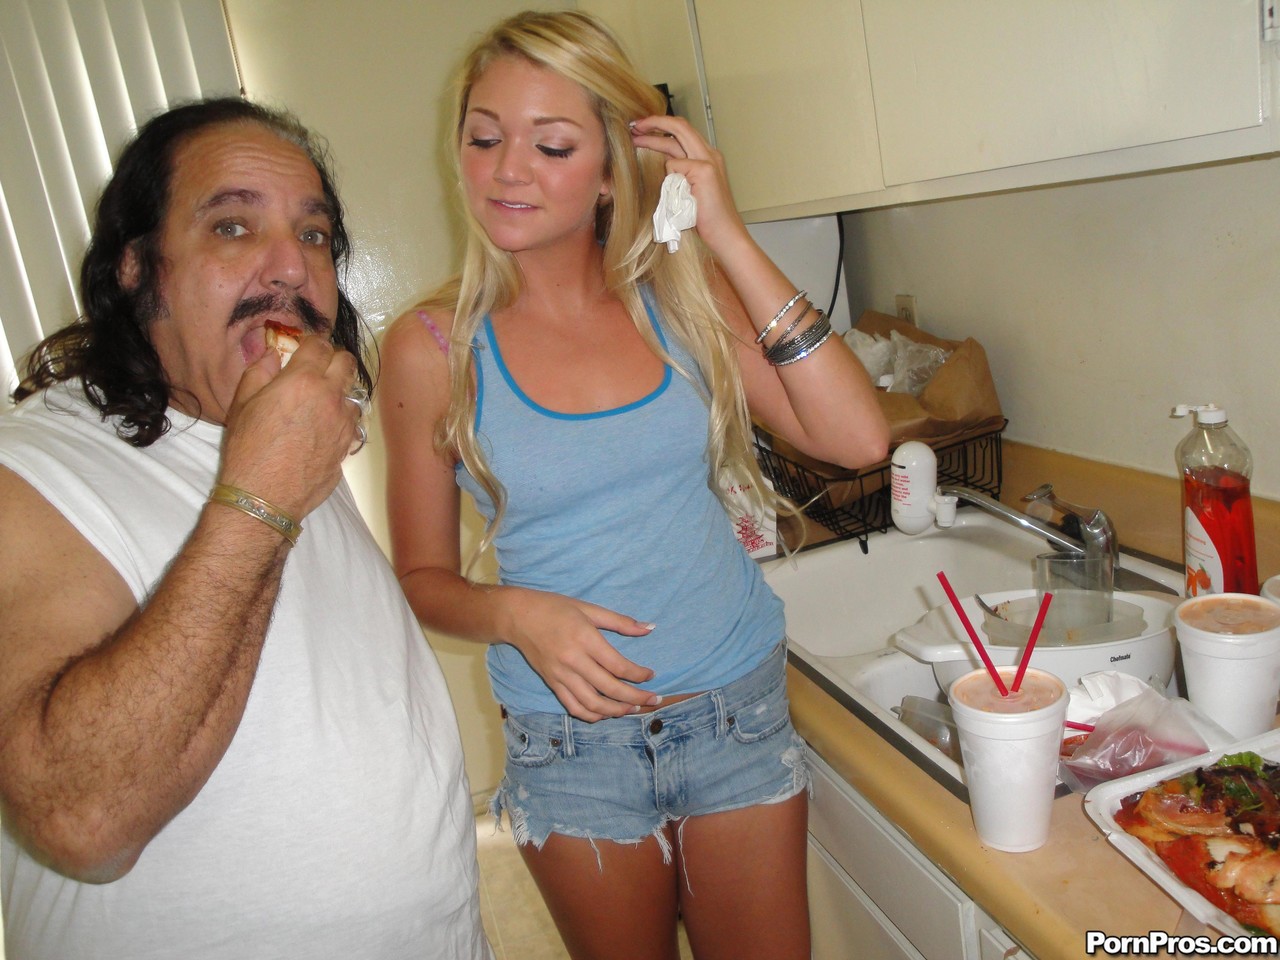 Sweet young blonde Jessie Andrews swallowing and riding an old man's cock porn photo #422620478